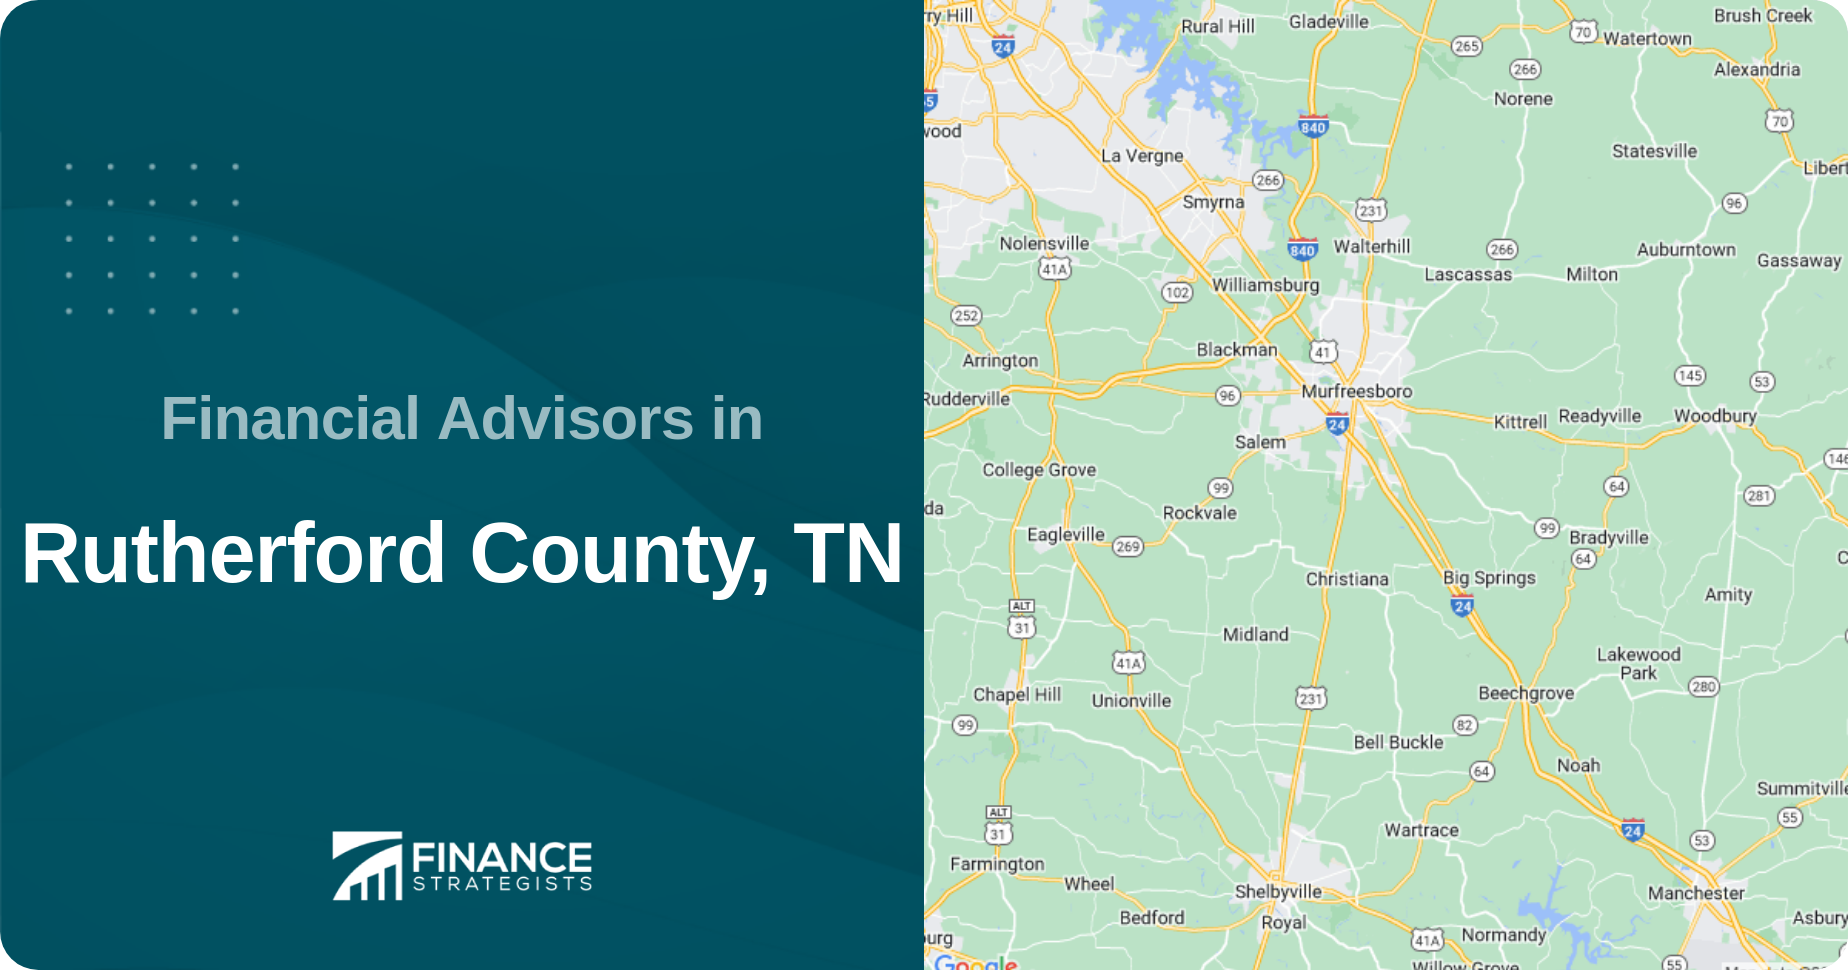 Financial Advisors in Rutherford County, TN